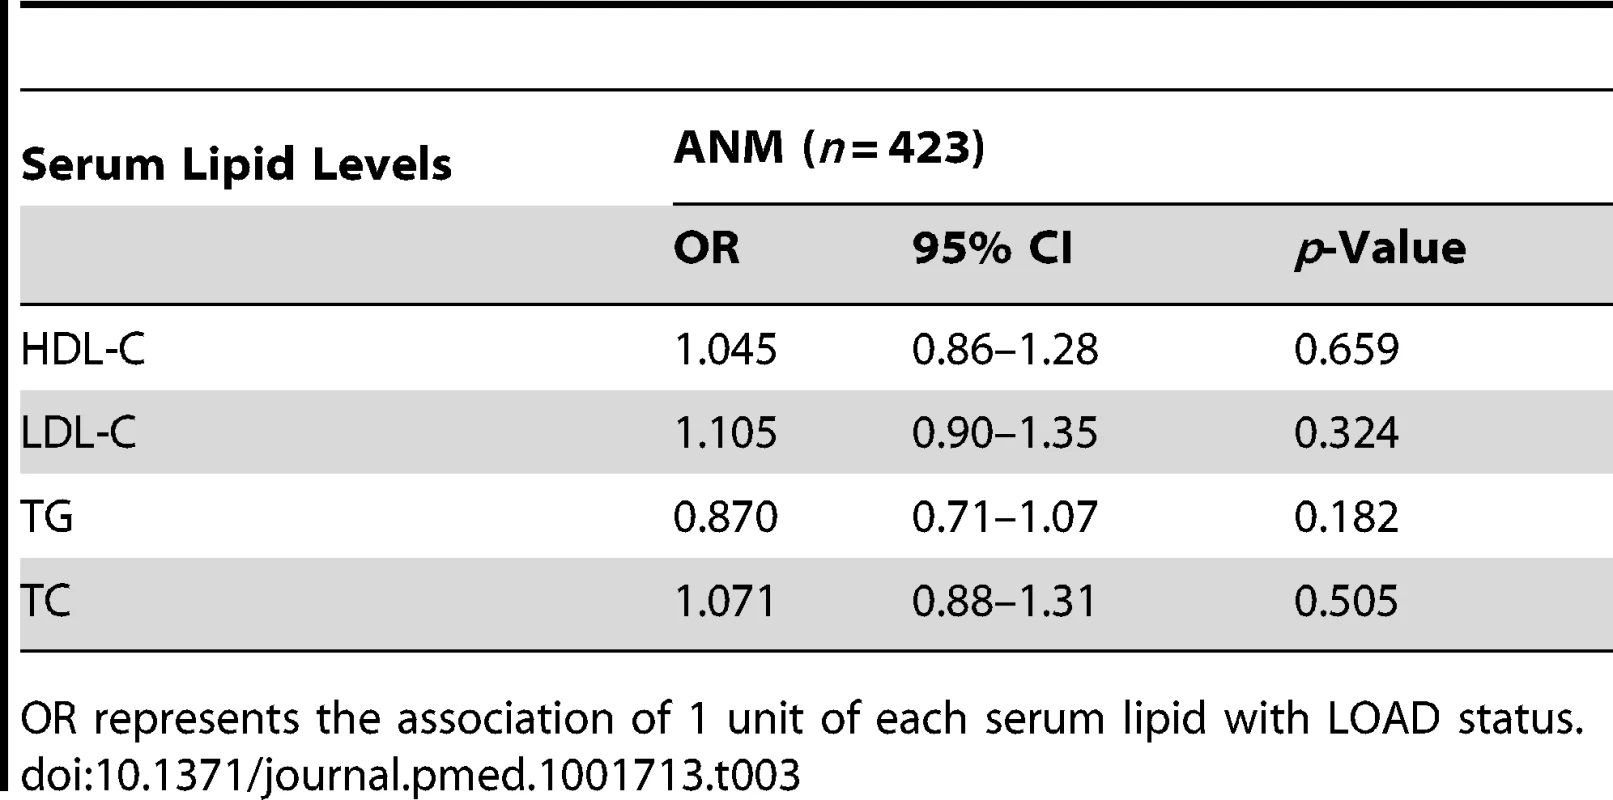 Association of serum lipid levels with LOAD in participants of the ANM cohort.